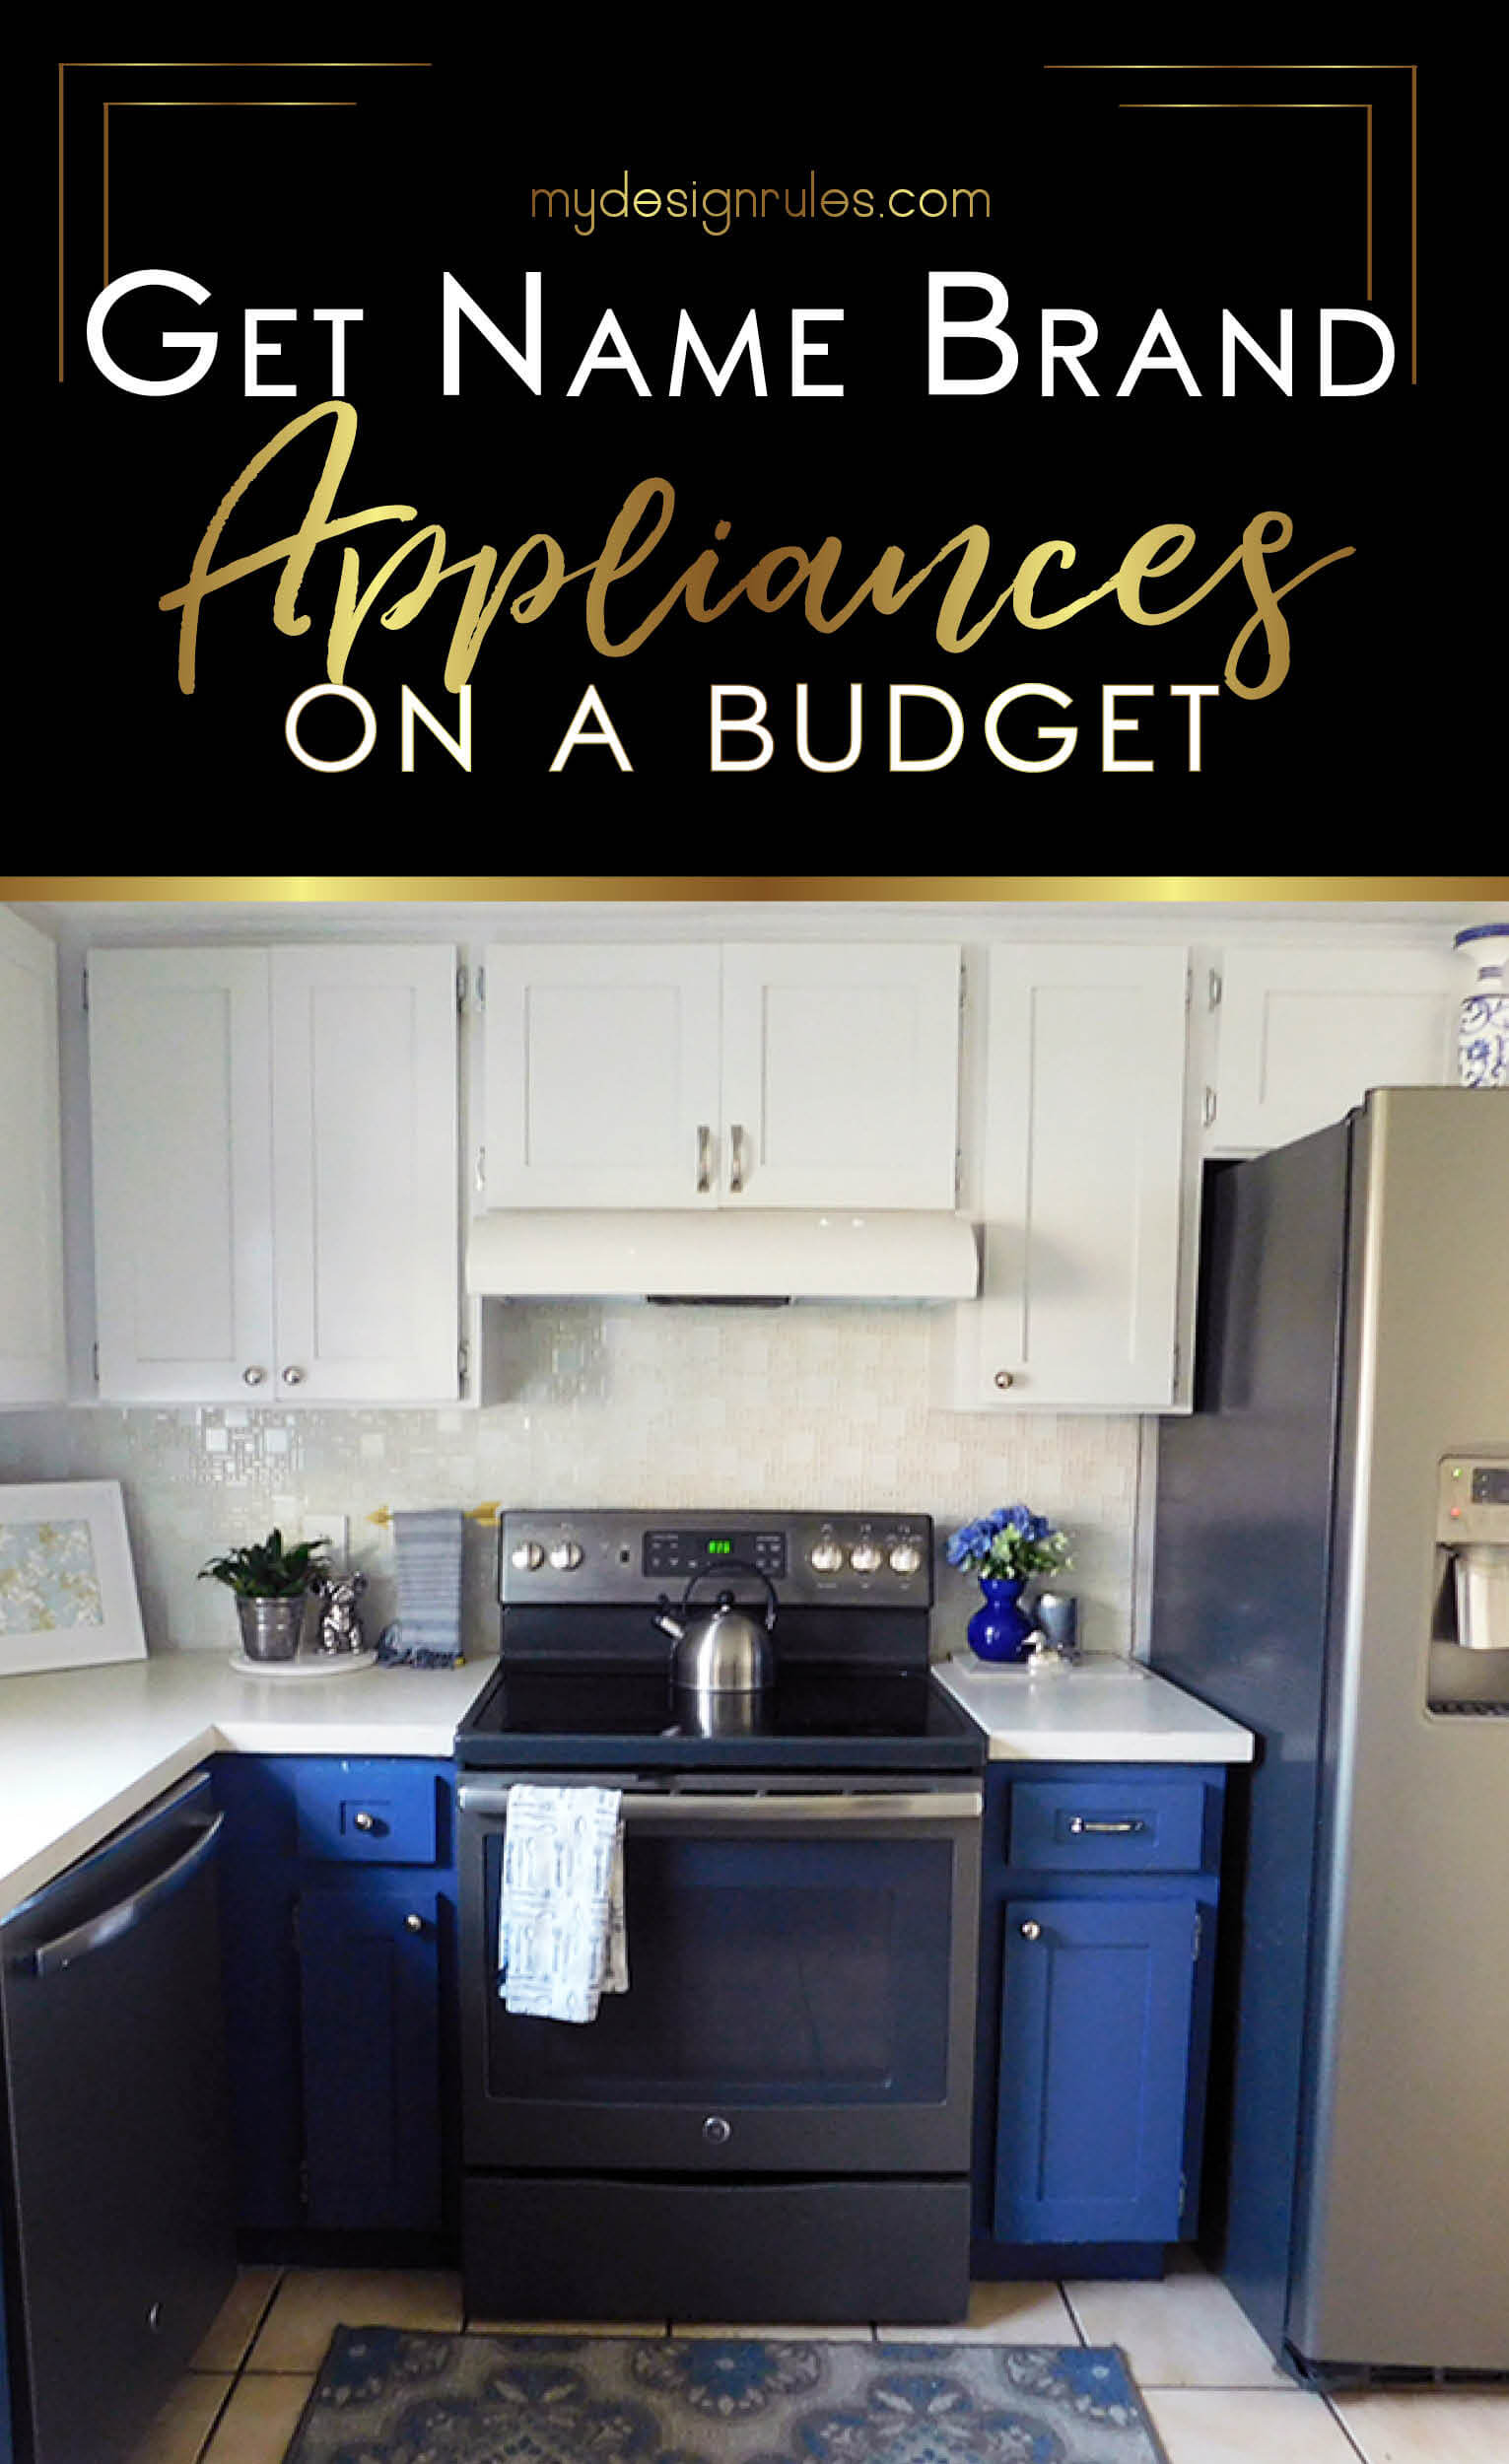 How To Get The Best Deal On Brand Name Appliances My Design Rules